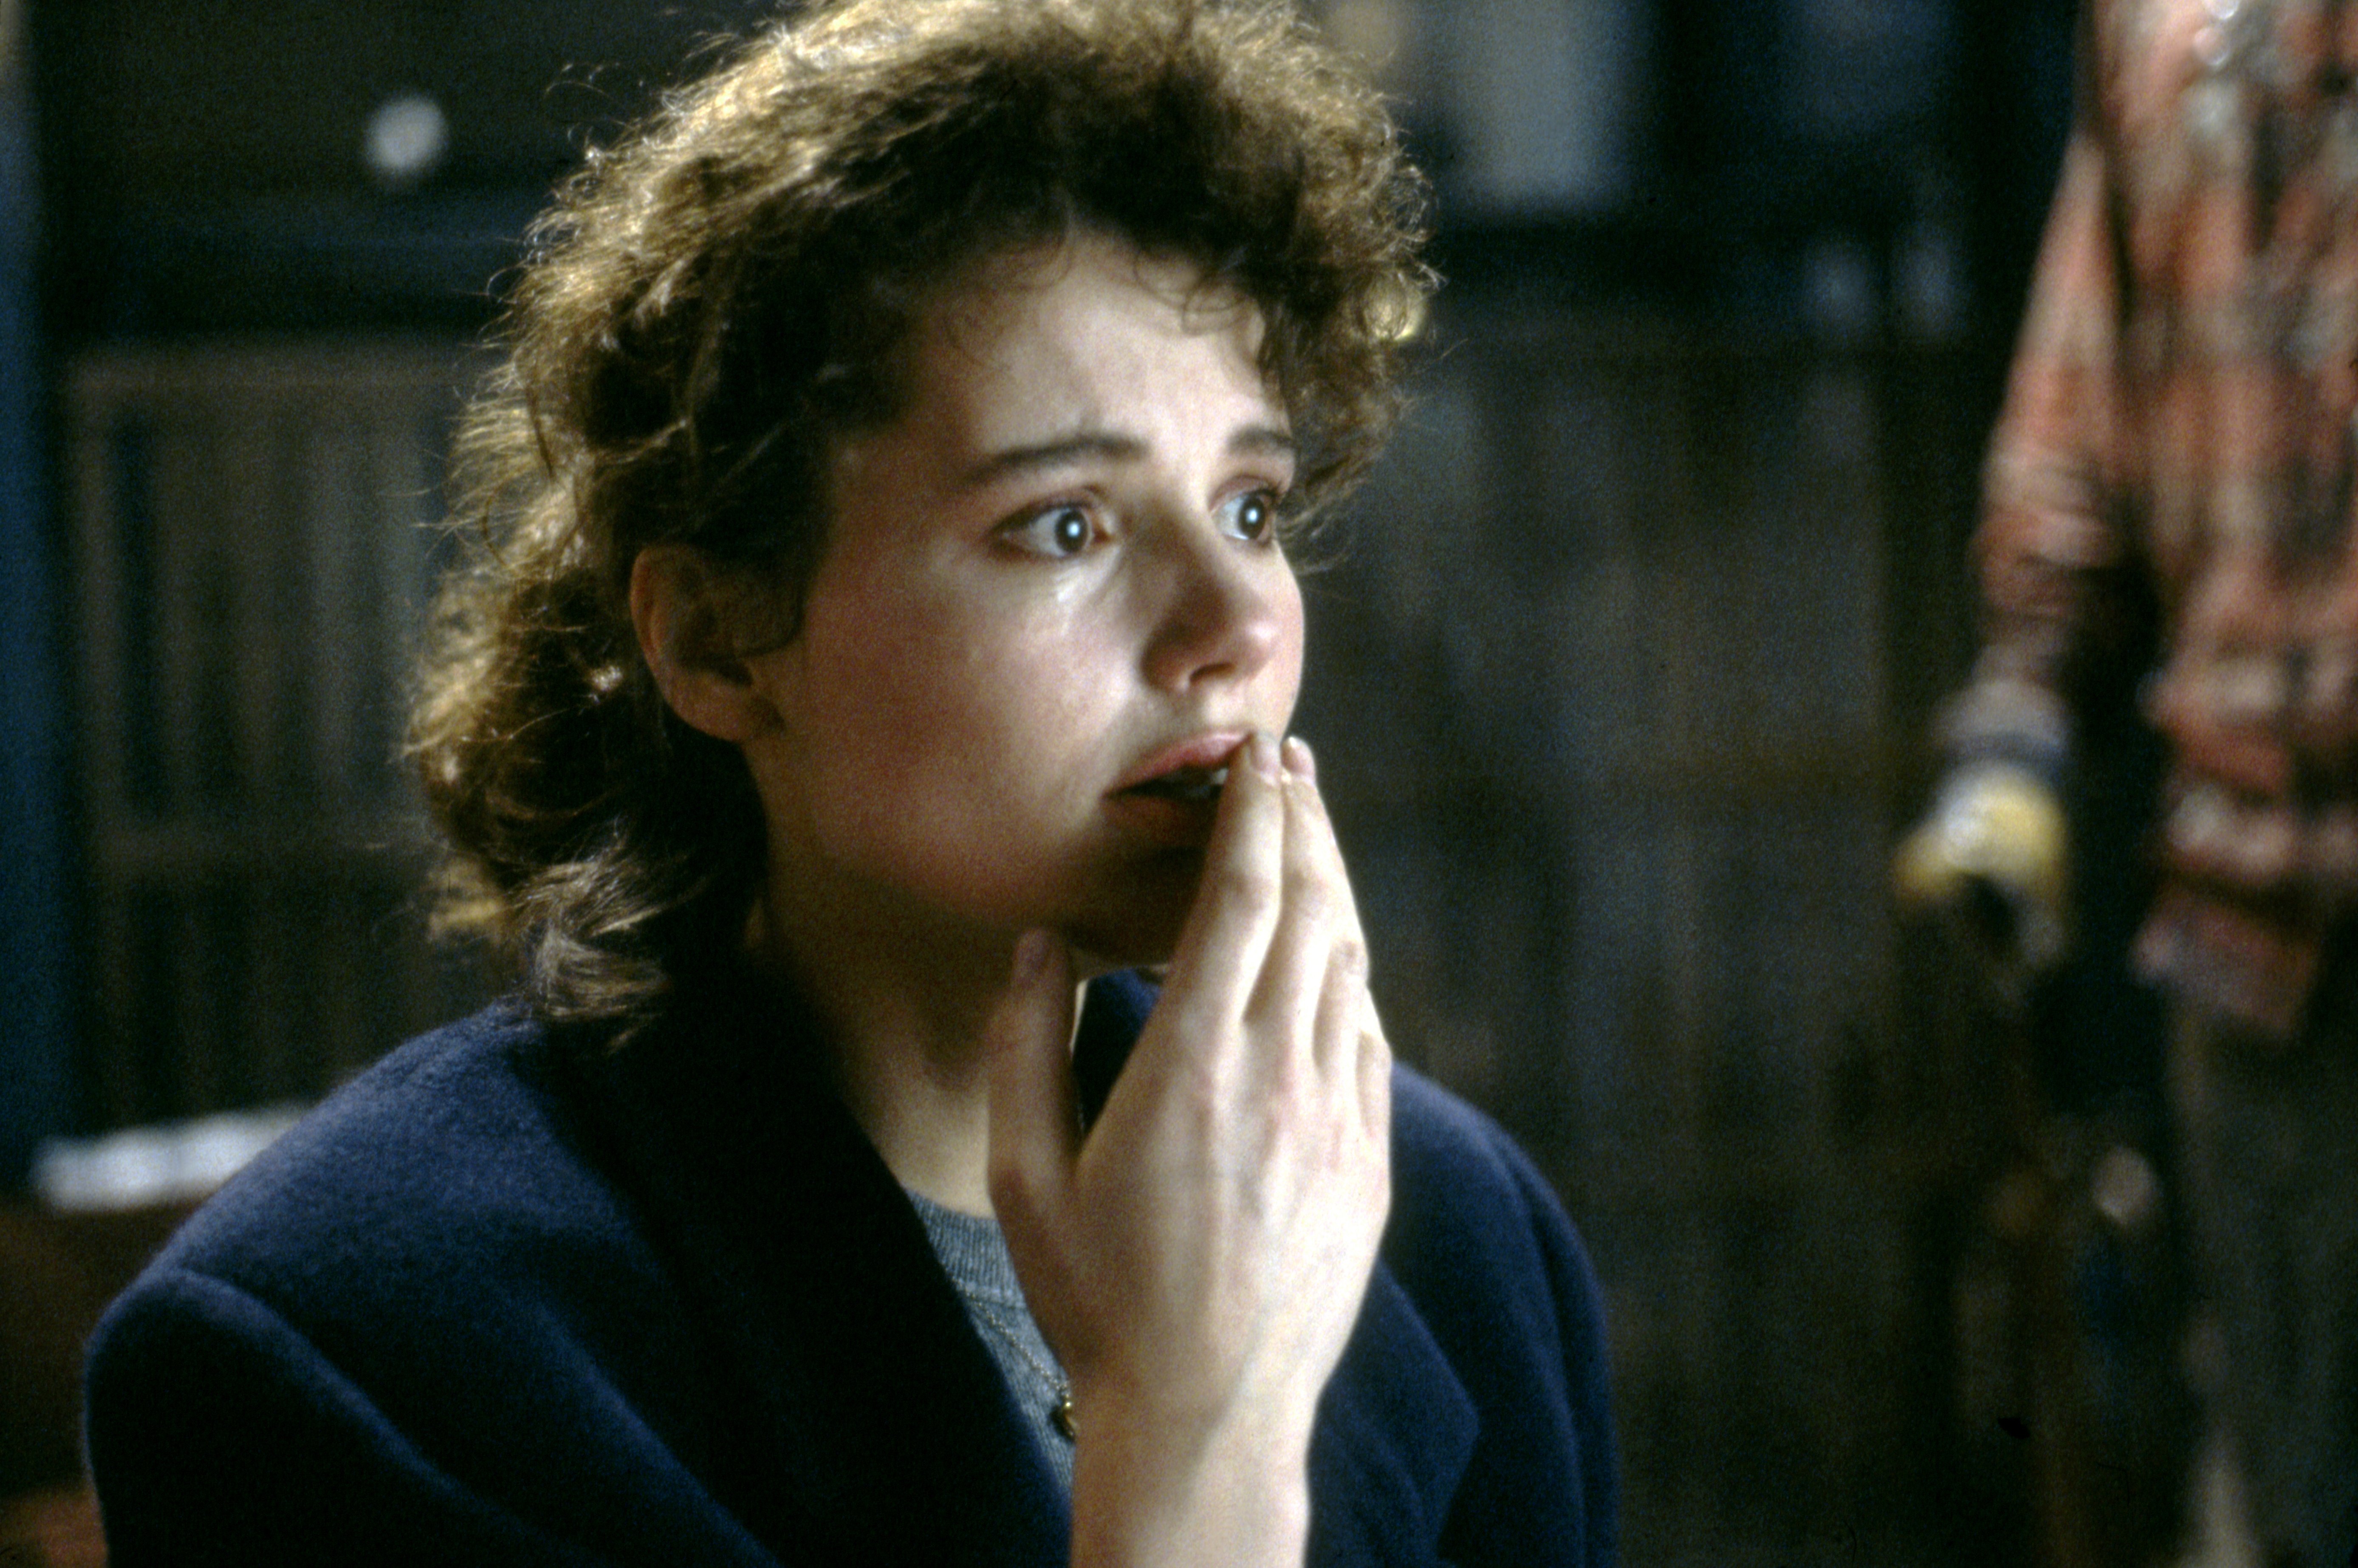 Geena Davis on the set of "The Fly" circa 1984 | Source: Getty Images